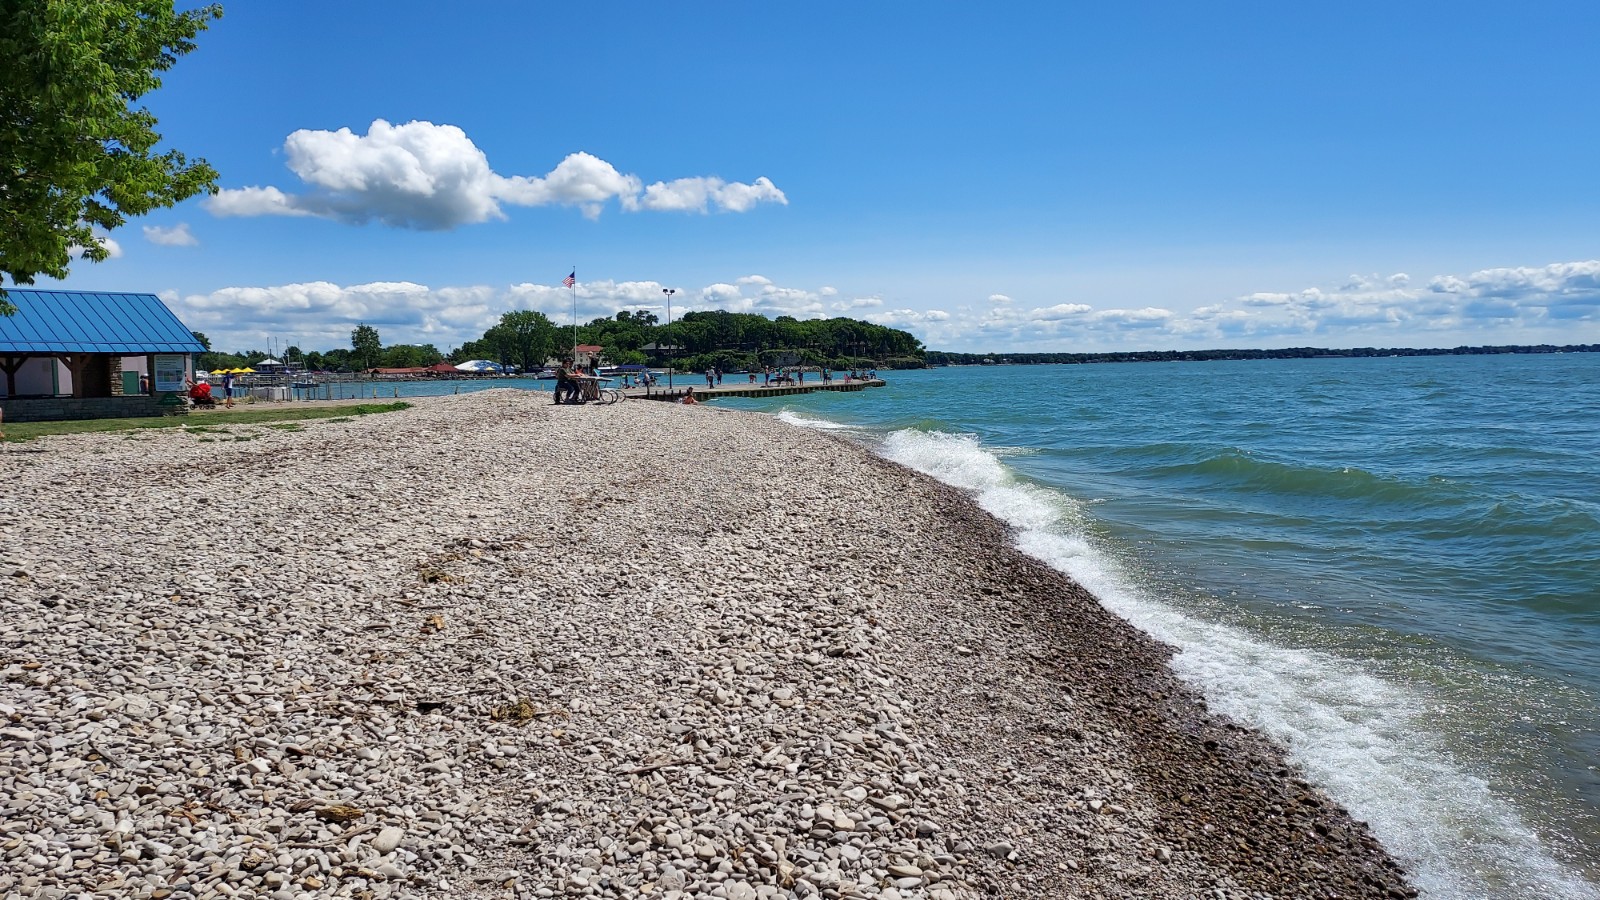 Photo of Catawba Island State Park Beach with gray pebble surface